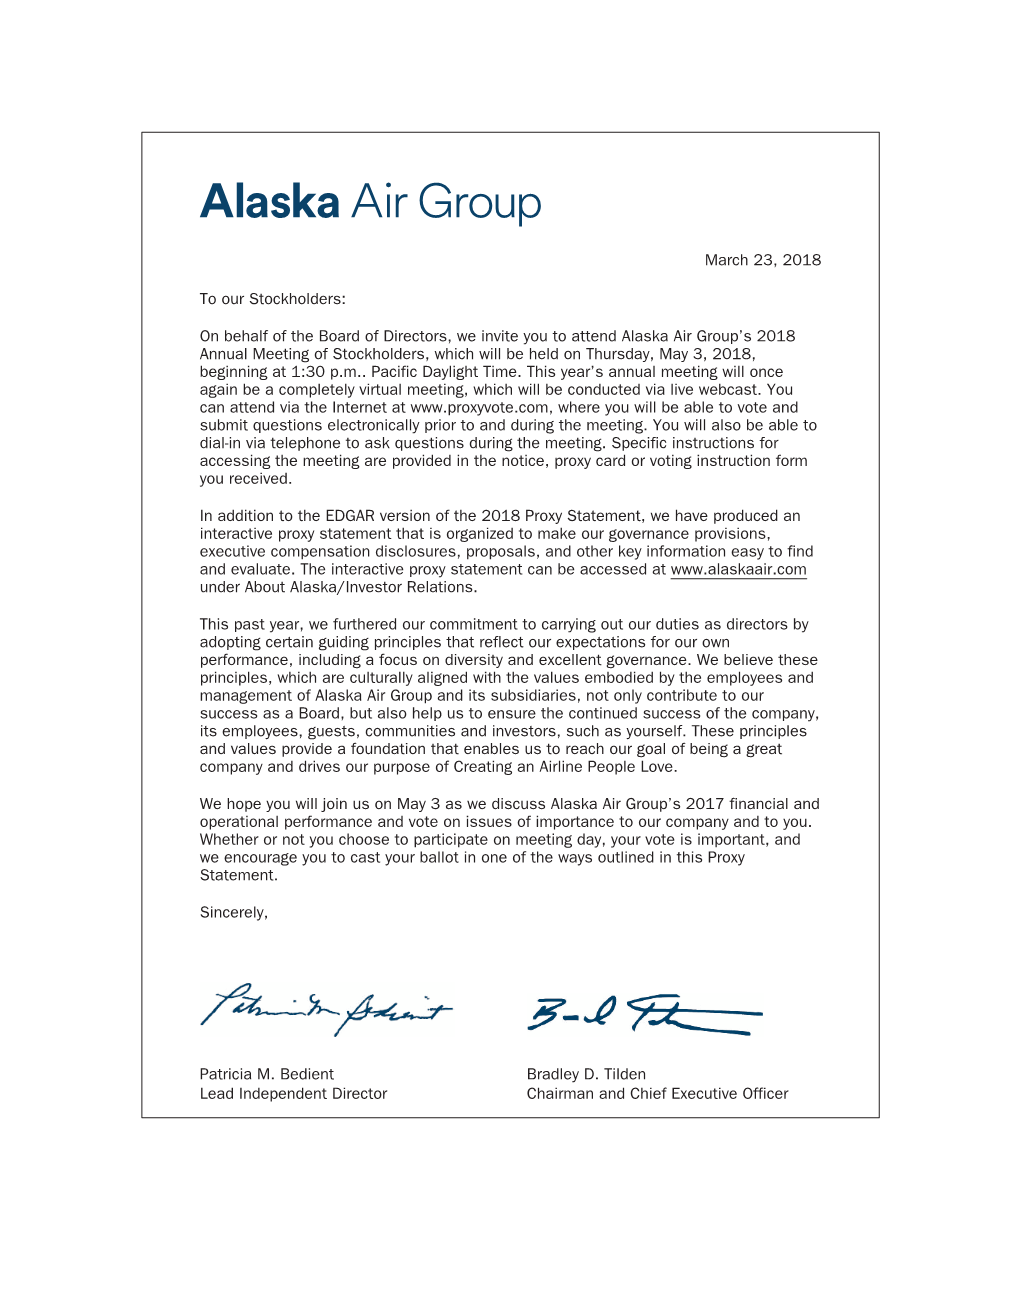 Alaska Air Group’S 2018 Annual Meeting of Stockholders, Which Will Be Held on Thursday, May 3, 2018, Beginning at 1:30 P.M